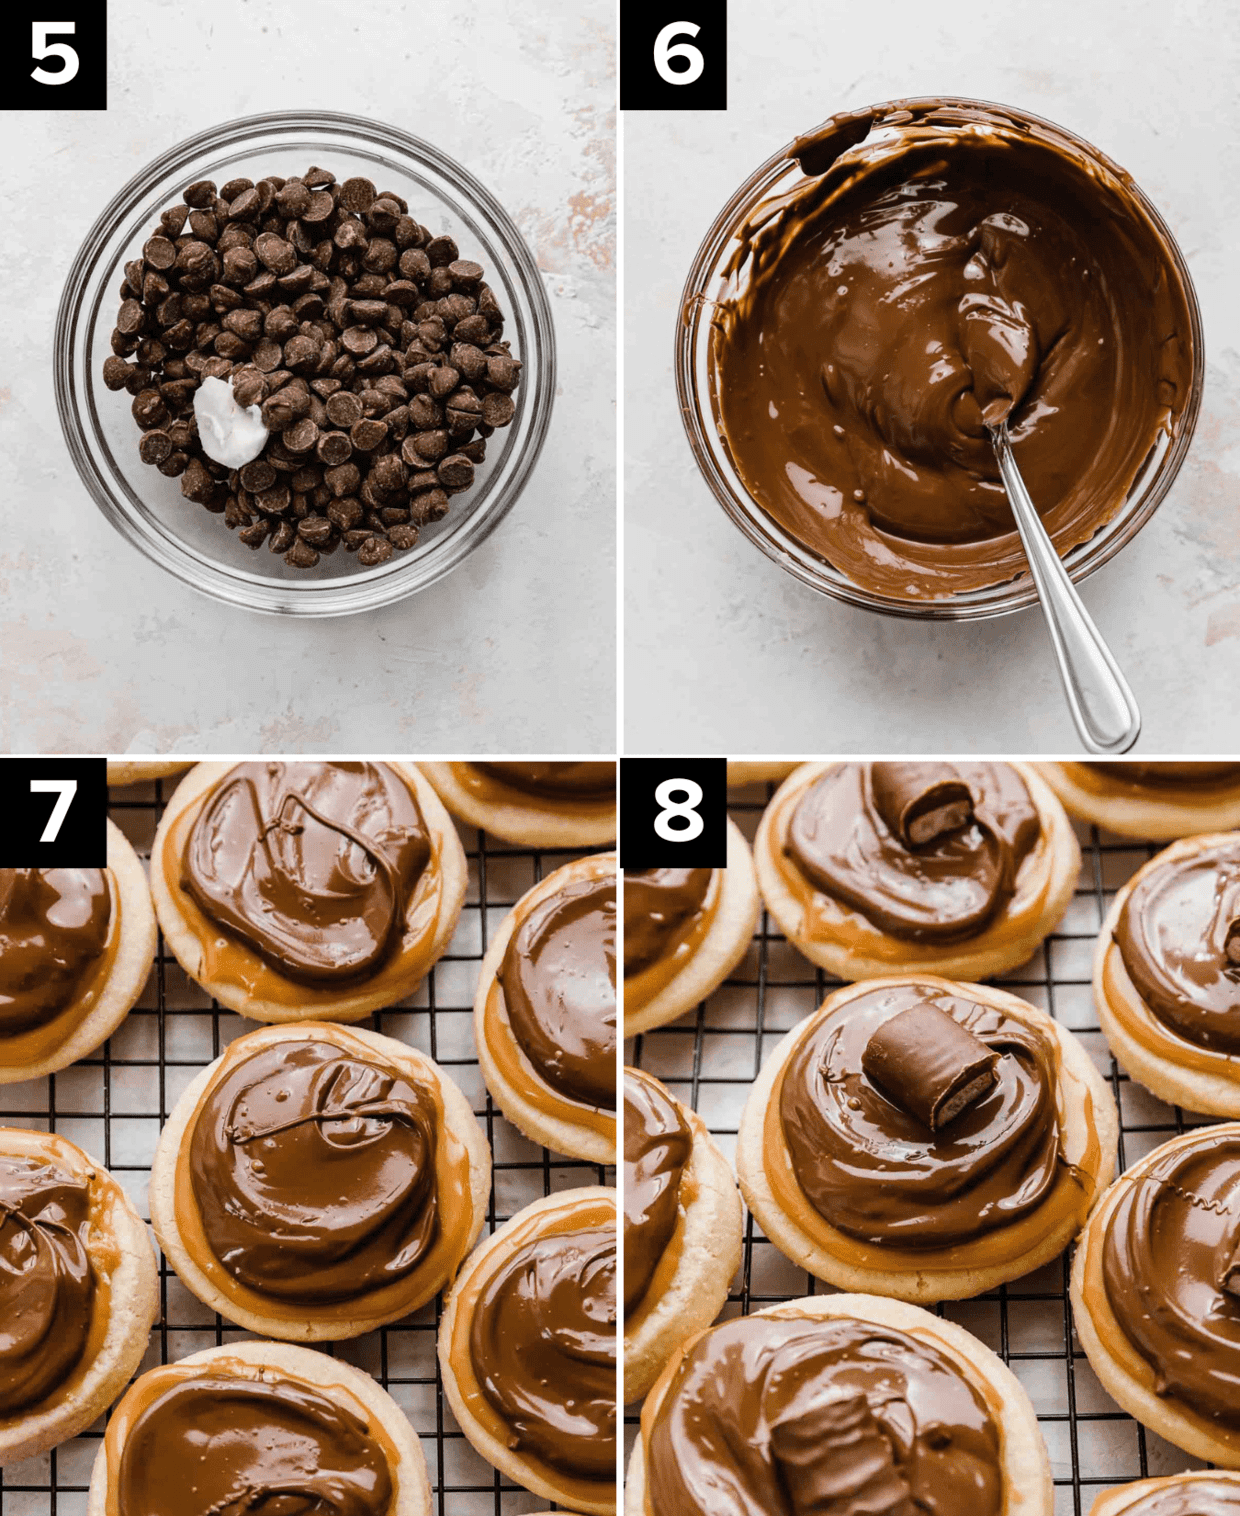 Four images showing how to make Twix Cookies, top left is chocolate chips in glass bowl, top right tis melted chocolate in glass bowl, bottom left is caramel and chocolate topped shortbread cookies, bottom right is mini Twix bar topped on Twix cookies.